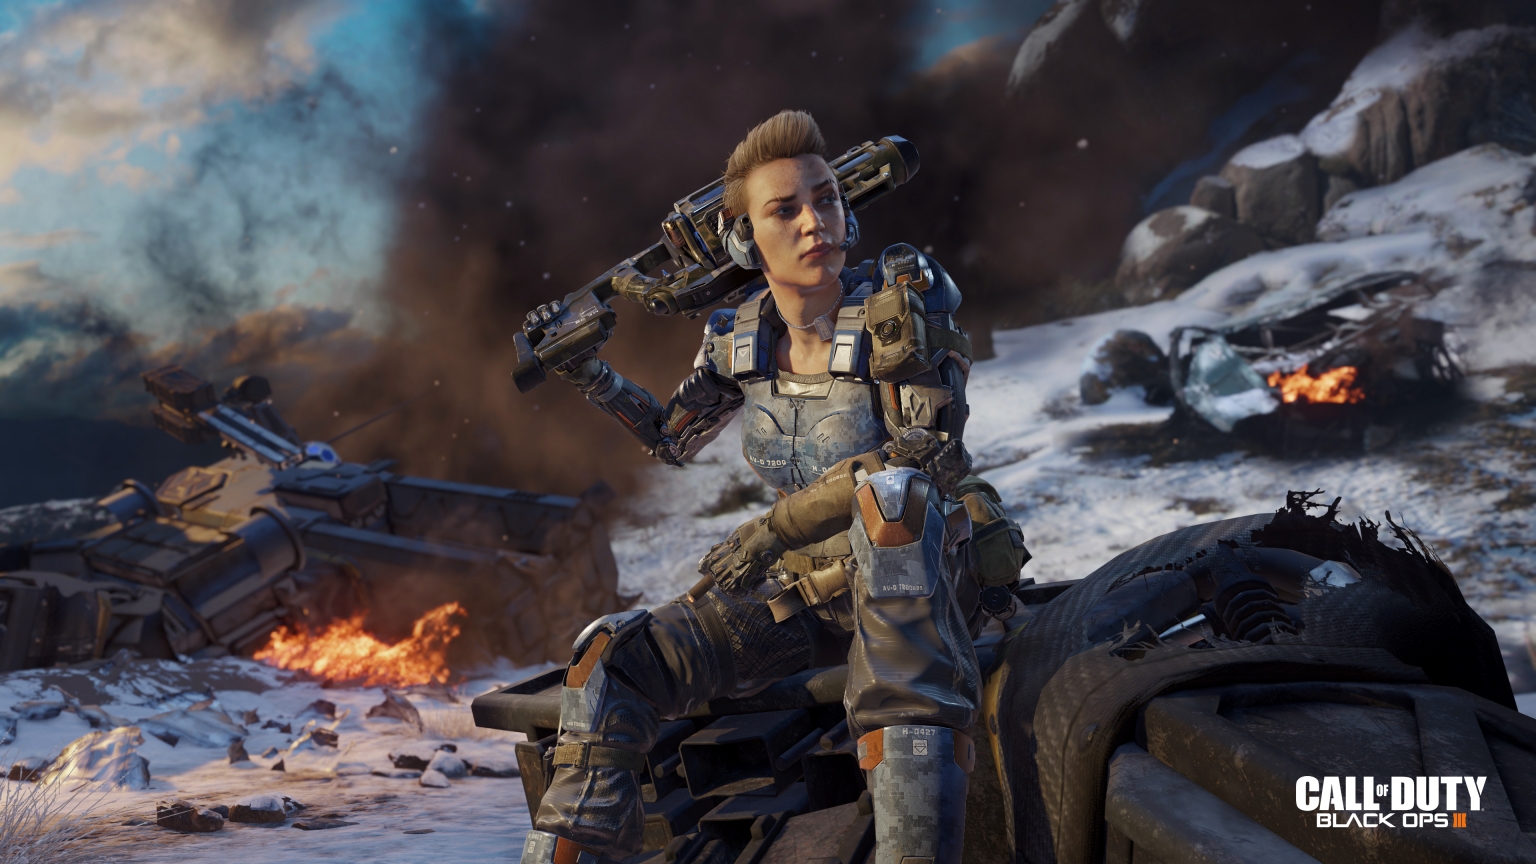 Call of Duty Black Ops 3 Girl for 1536 x 864 HDTV resolution